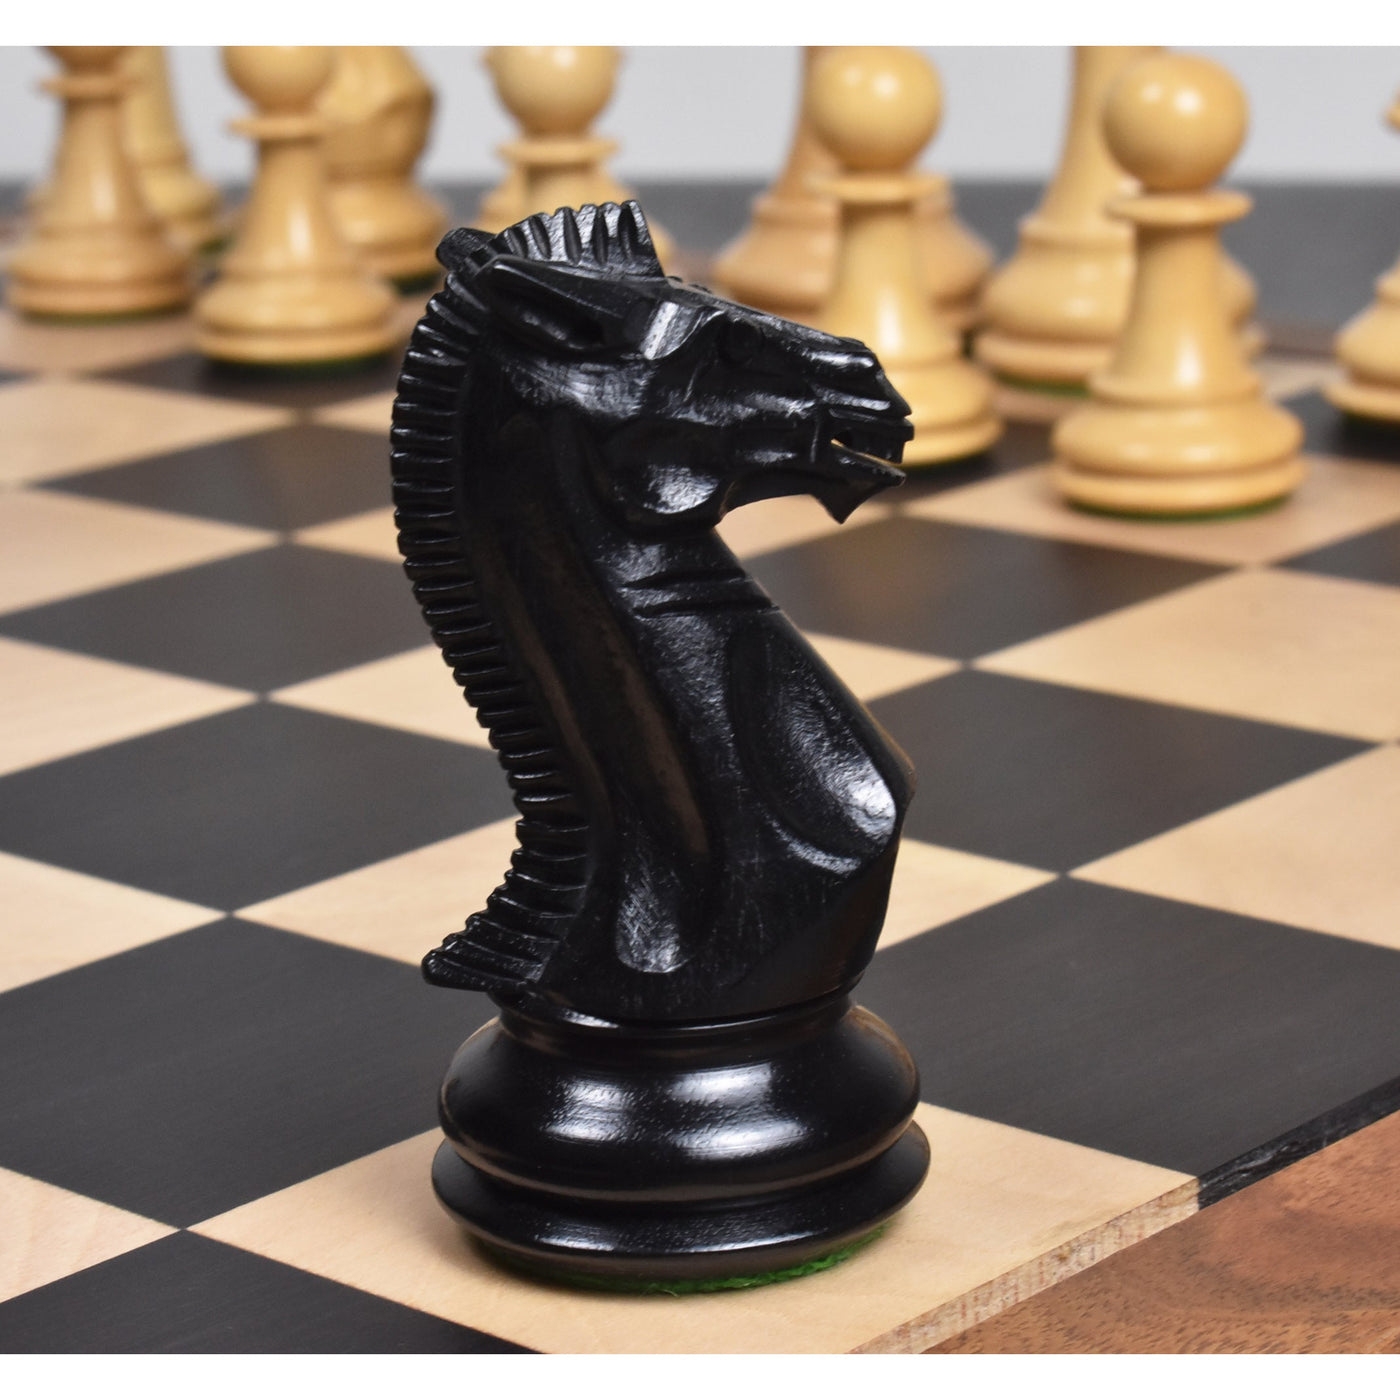 4.1" Traveller Staunton Luxury Chess Set - Chess Pieces Only-Triple Weighted Ebony Wood